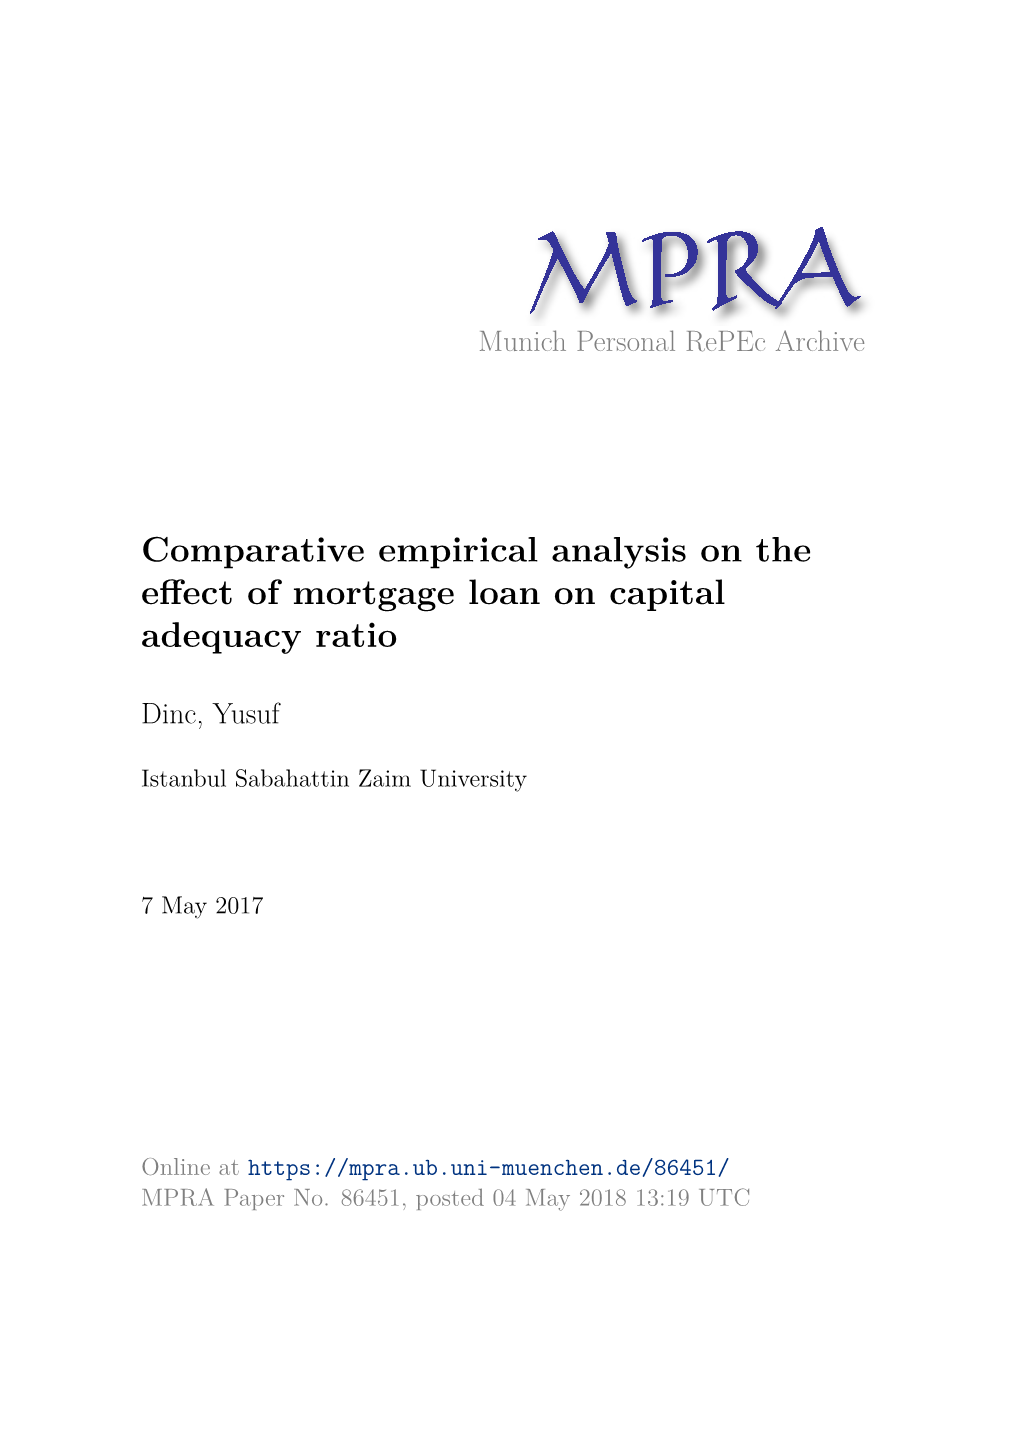 Comparative Empirical Analysis on the Eﬀect of Mortgage Loan on Capital Adequacy Ratio